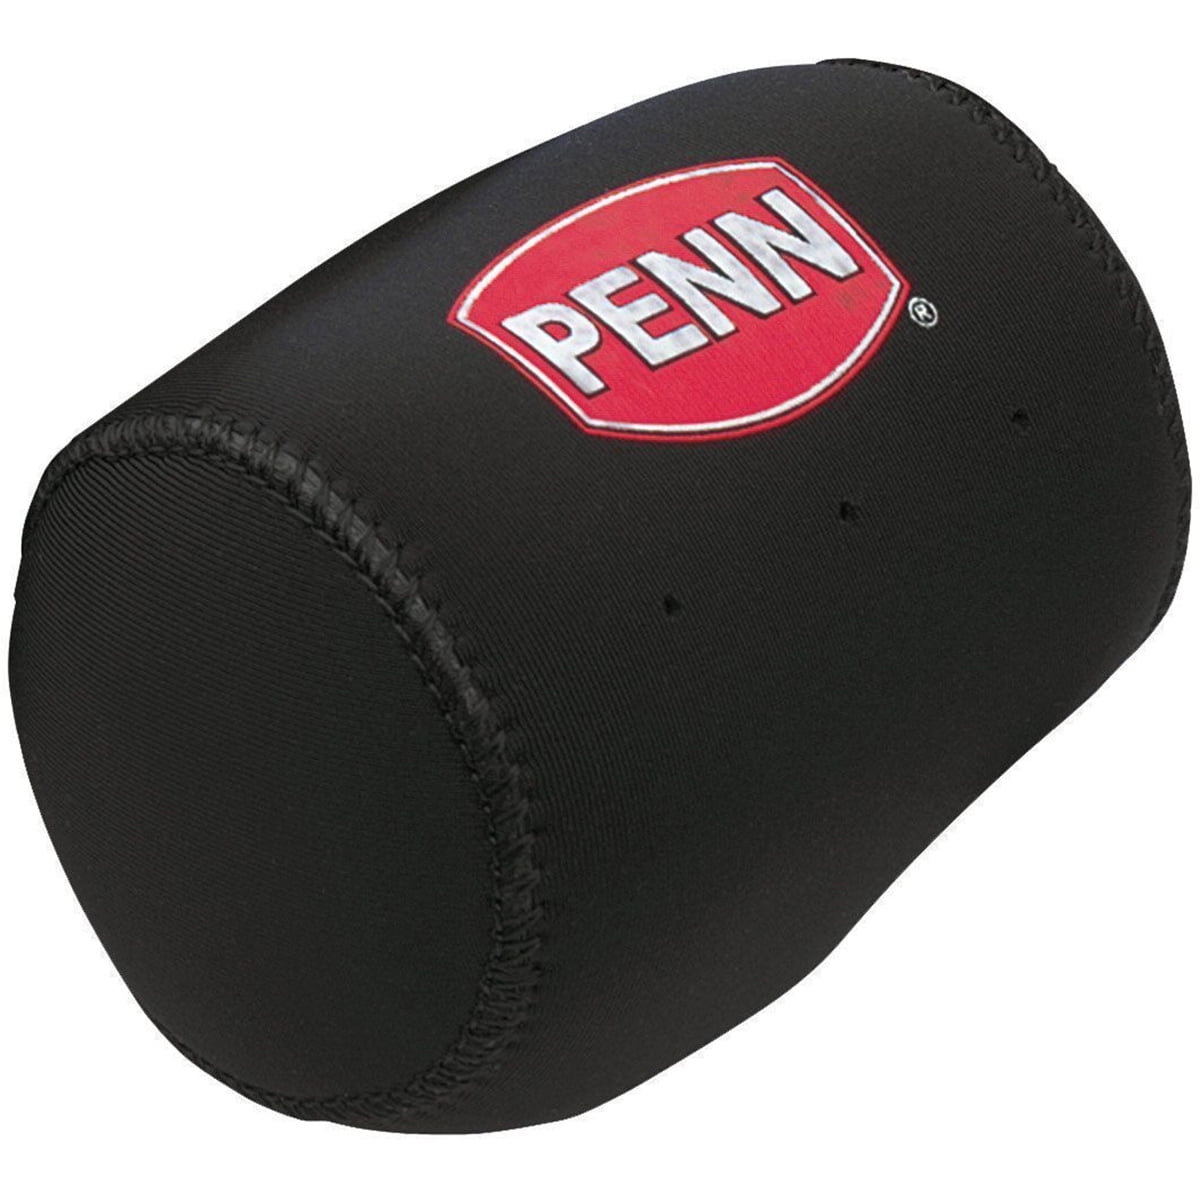 PENN Neoprene Conventional Reel Cover (Black), Size Extra Small